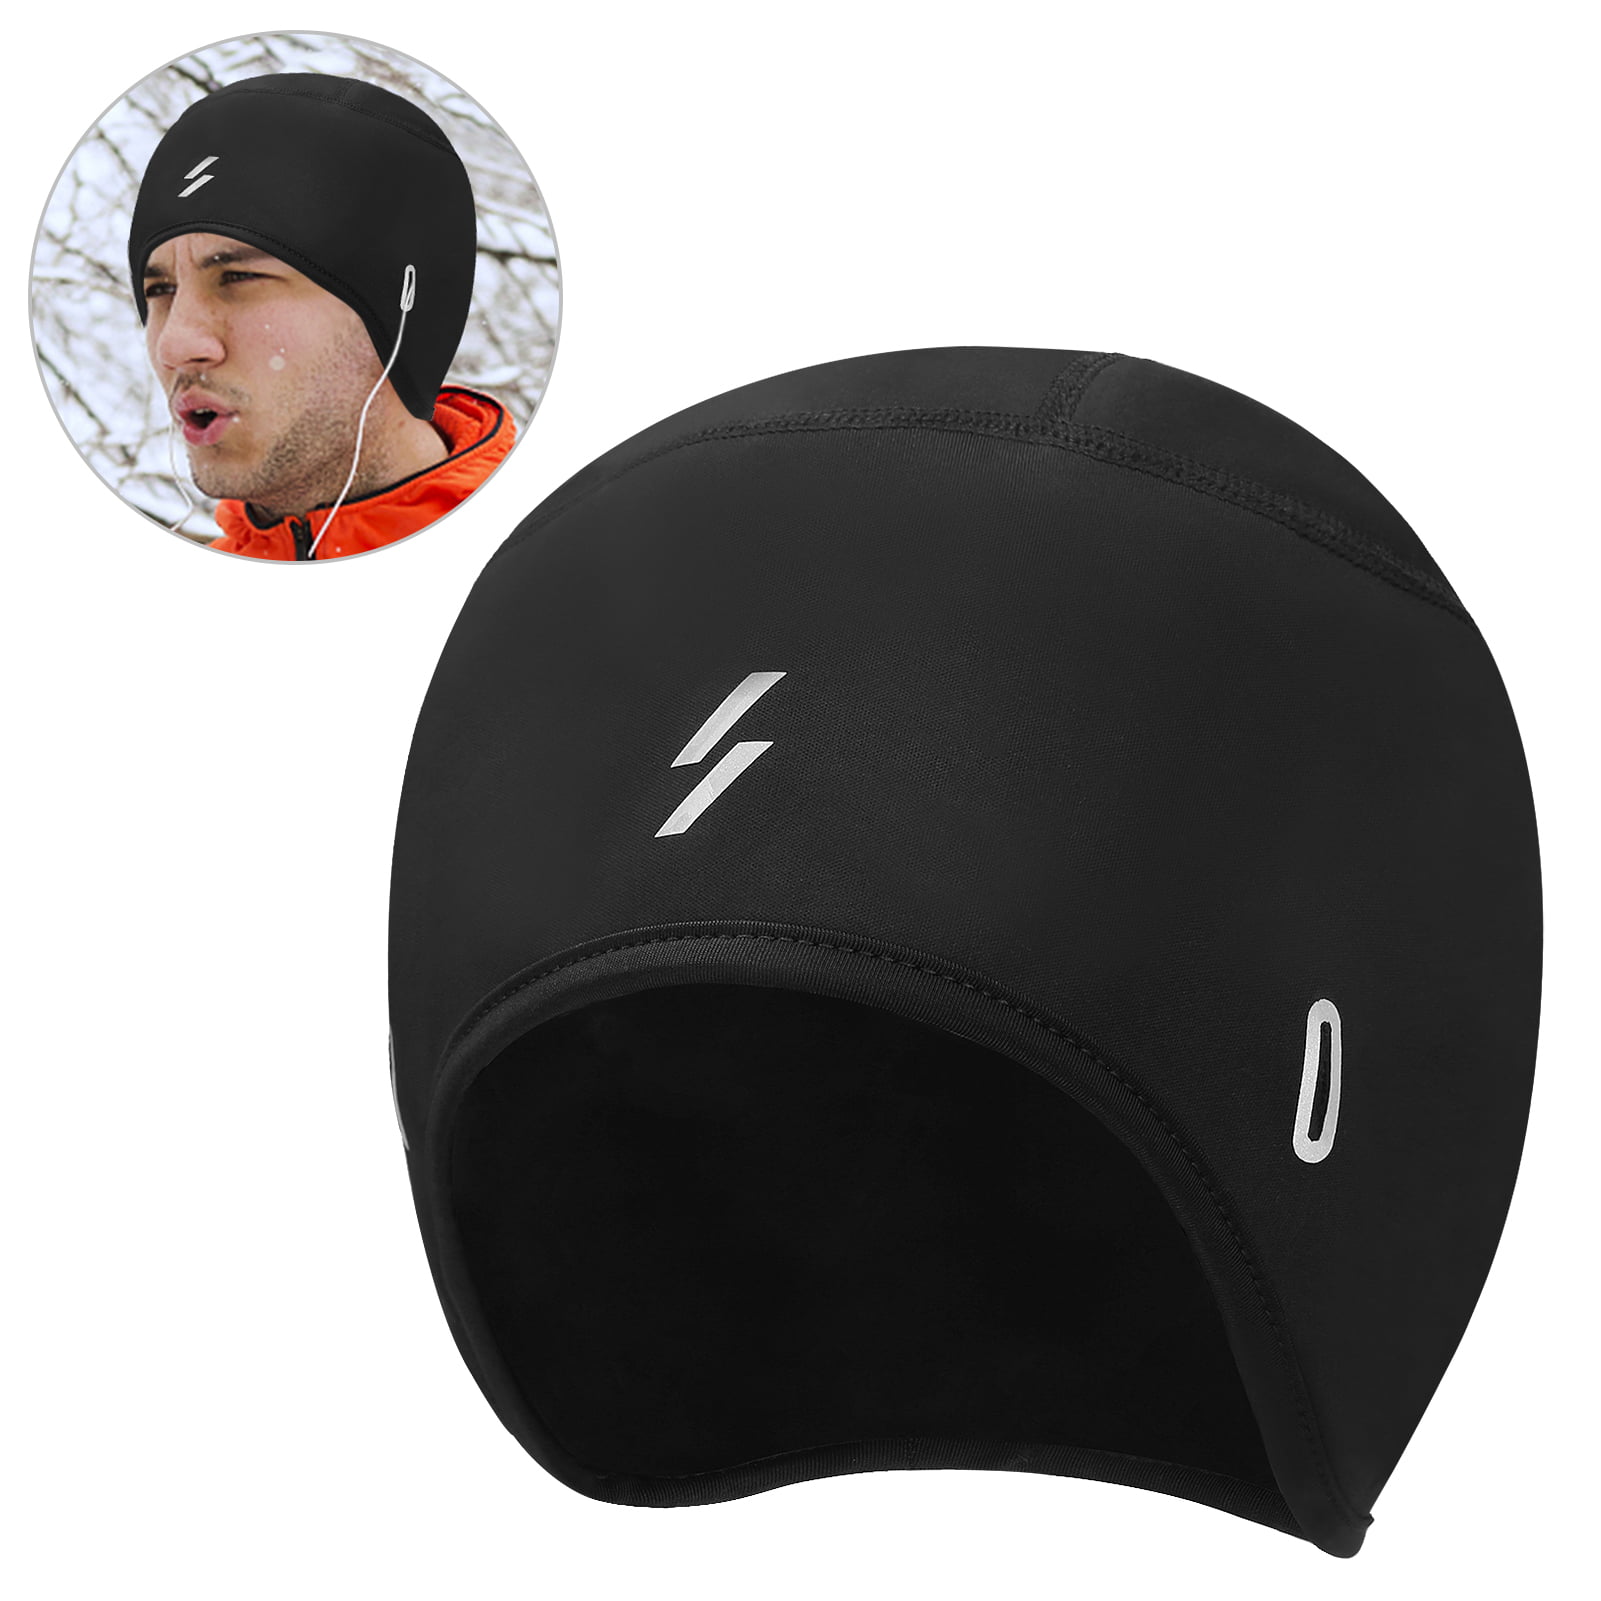 Cycle Under Helmet Thermal Warm Windproof Skull Cap Hat Ear Cycling Running 